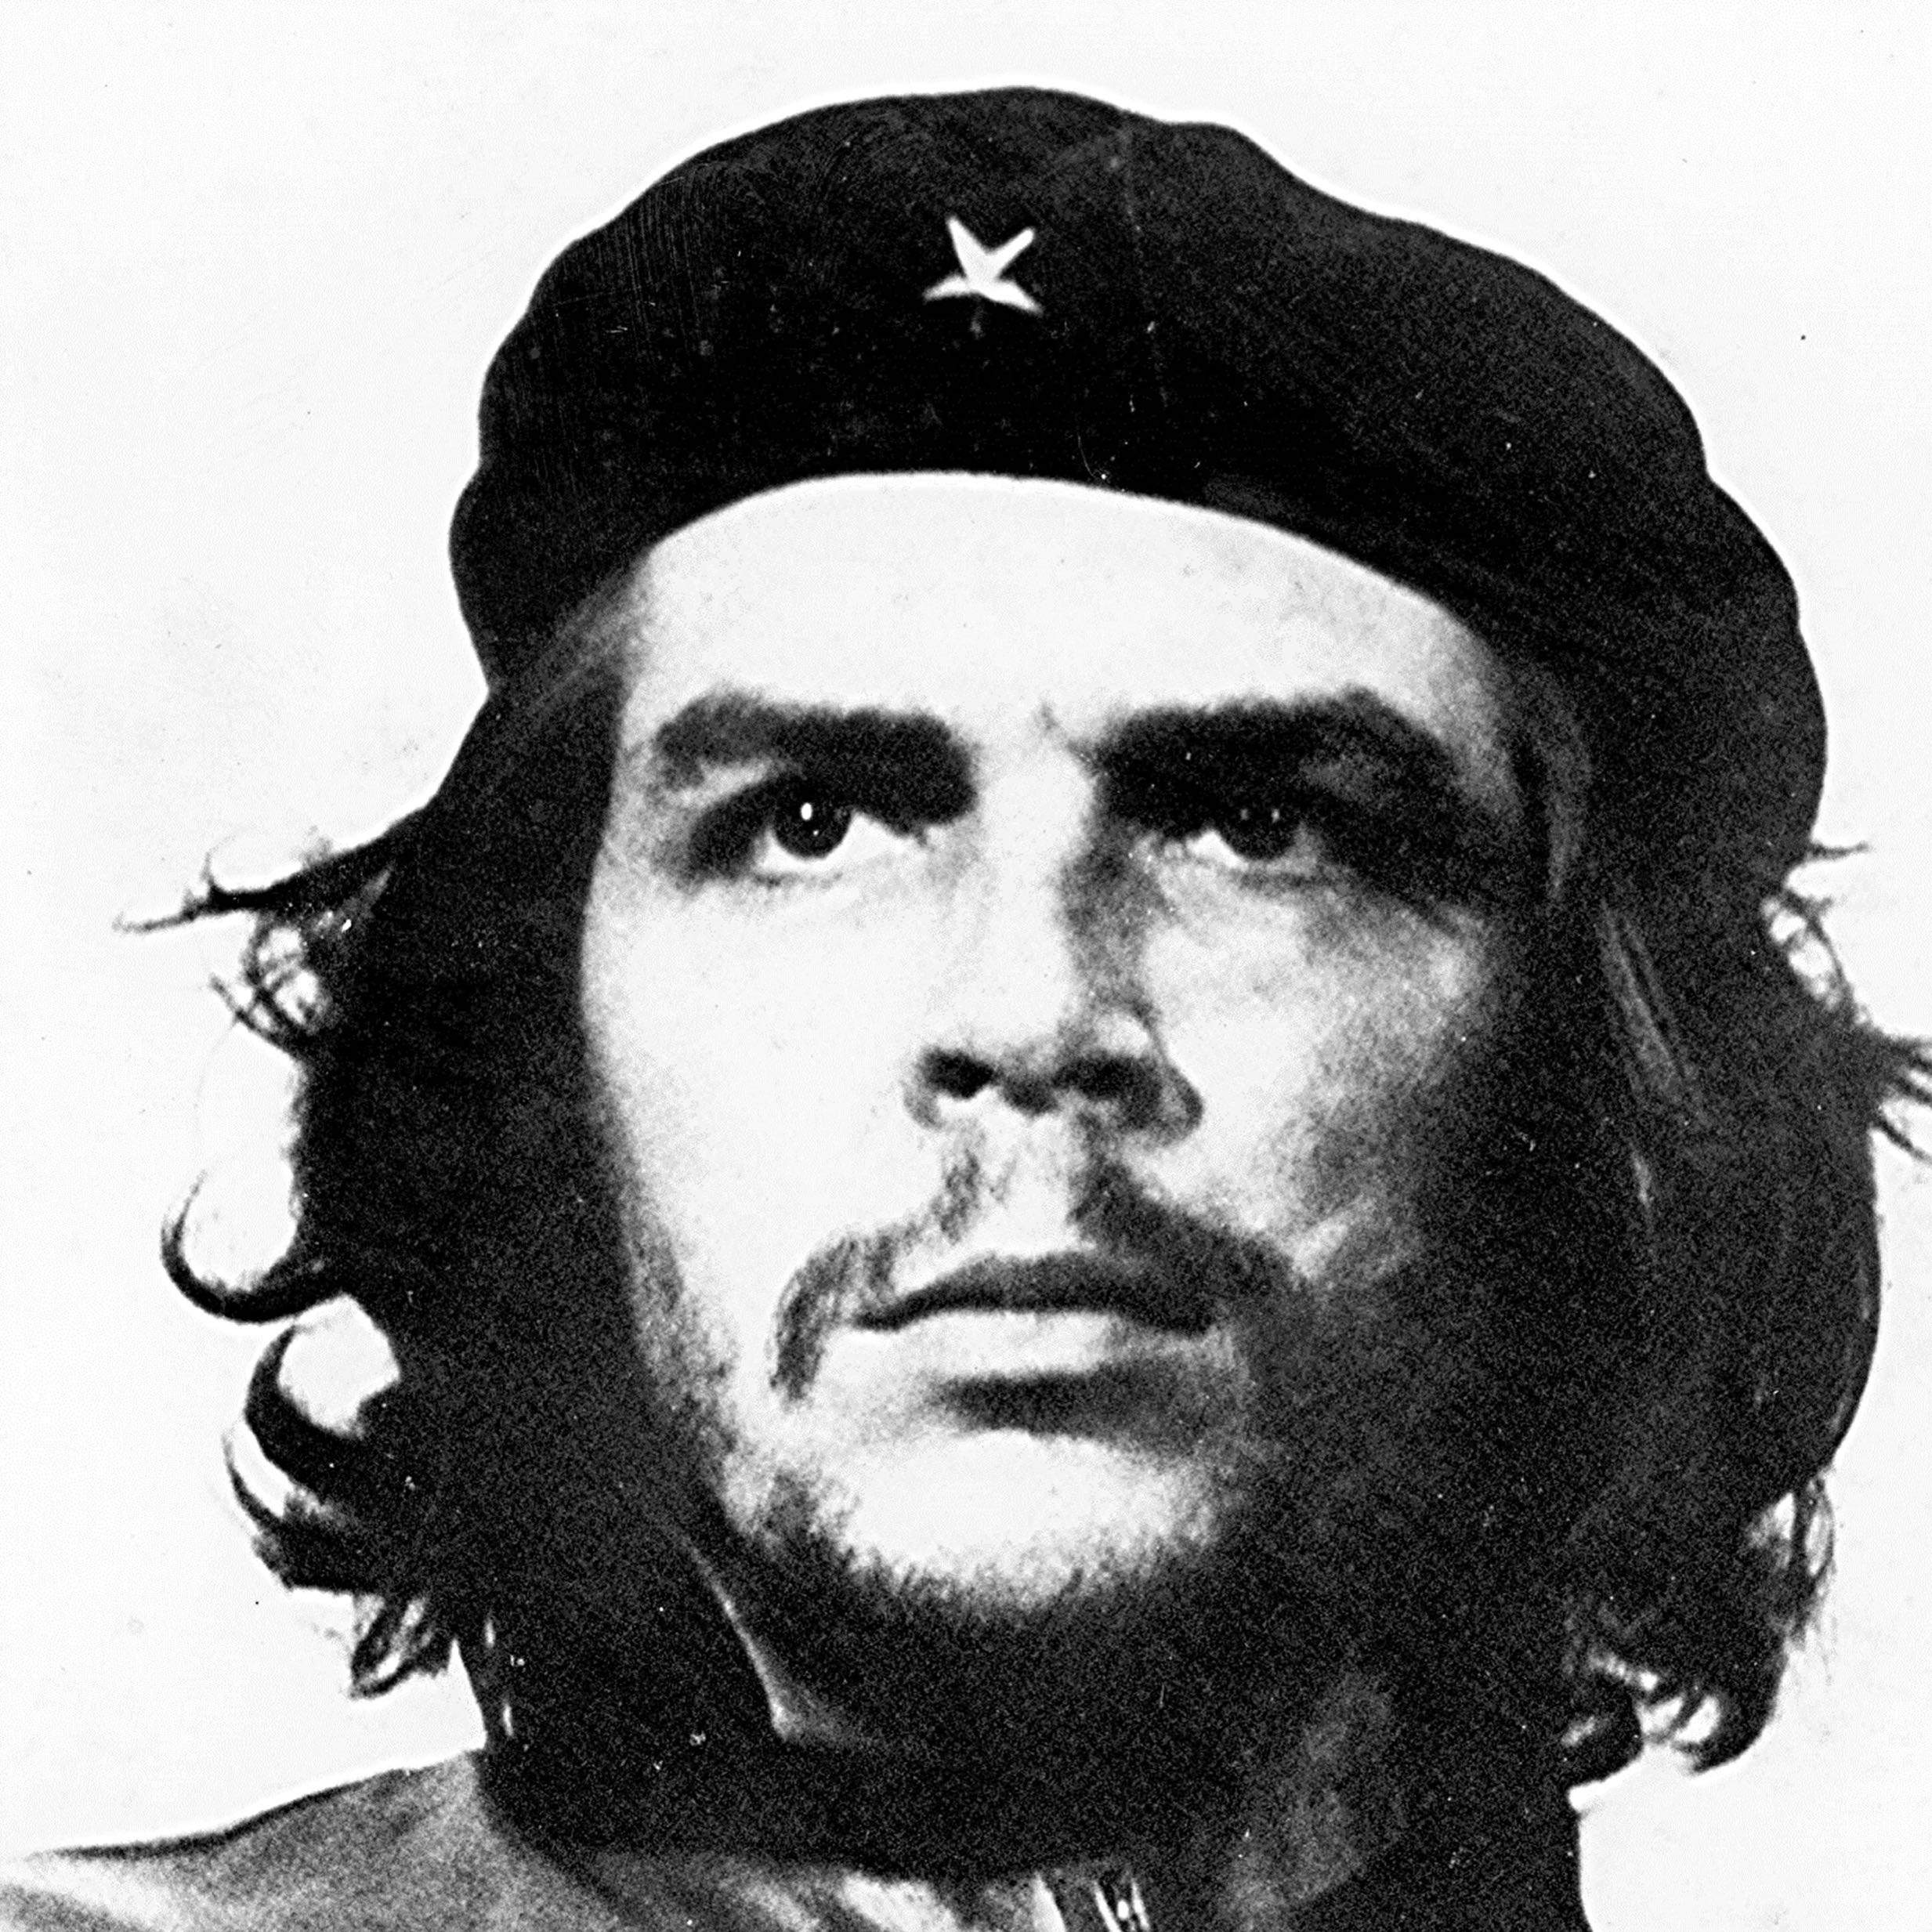 Does Che Guevara deserve to be in so many tee shirts? - Quora